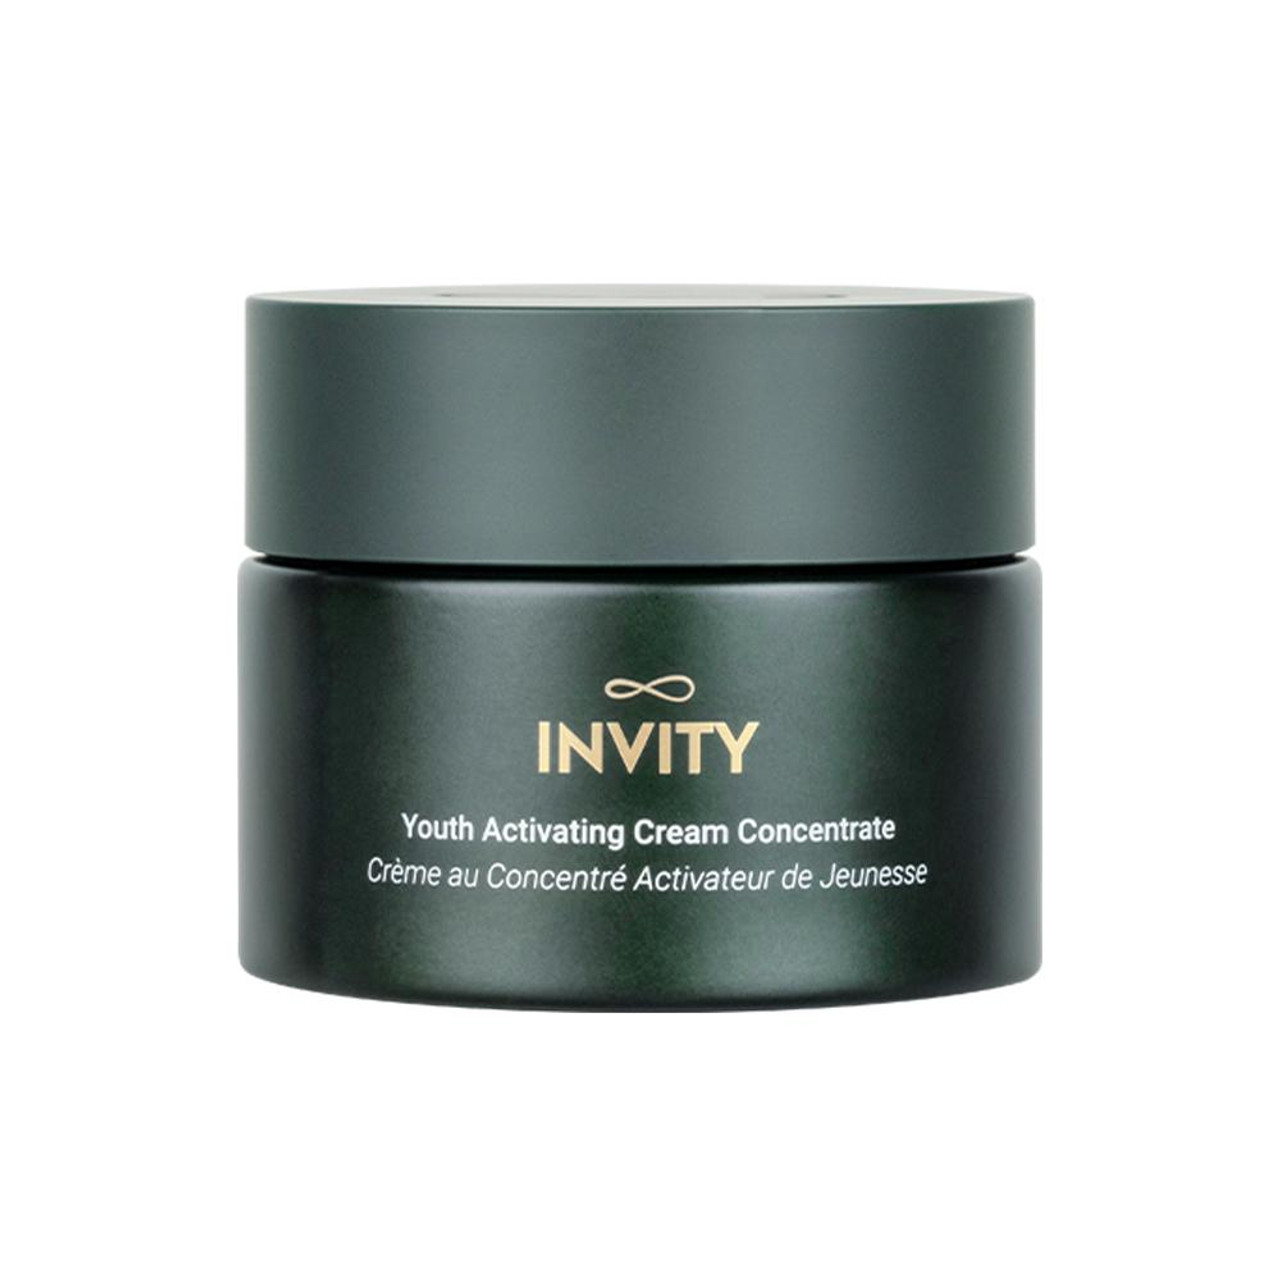 Youth Activating Cream Concentrate